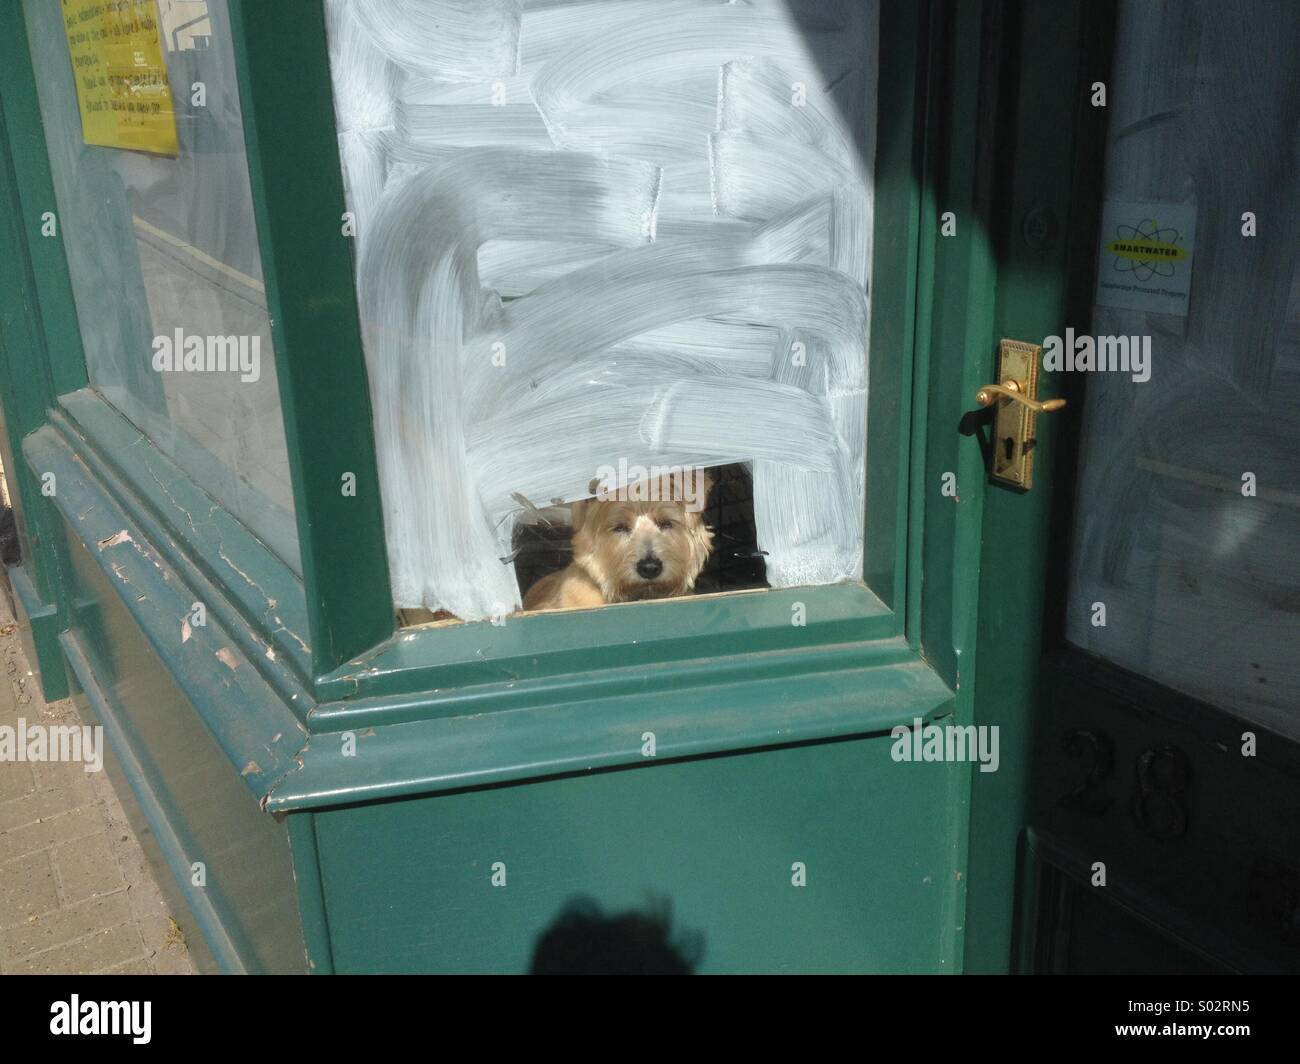 Pet dog looking out of closed shop window Stock Photo